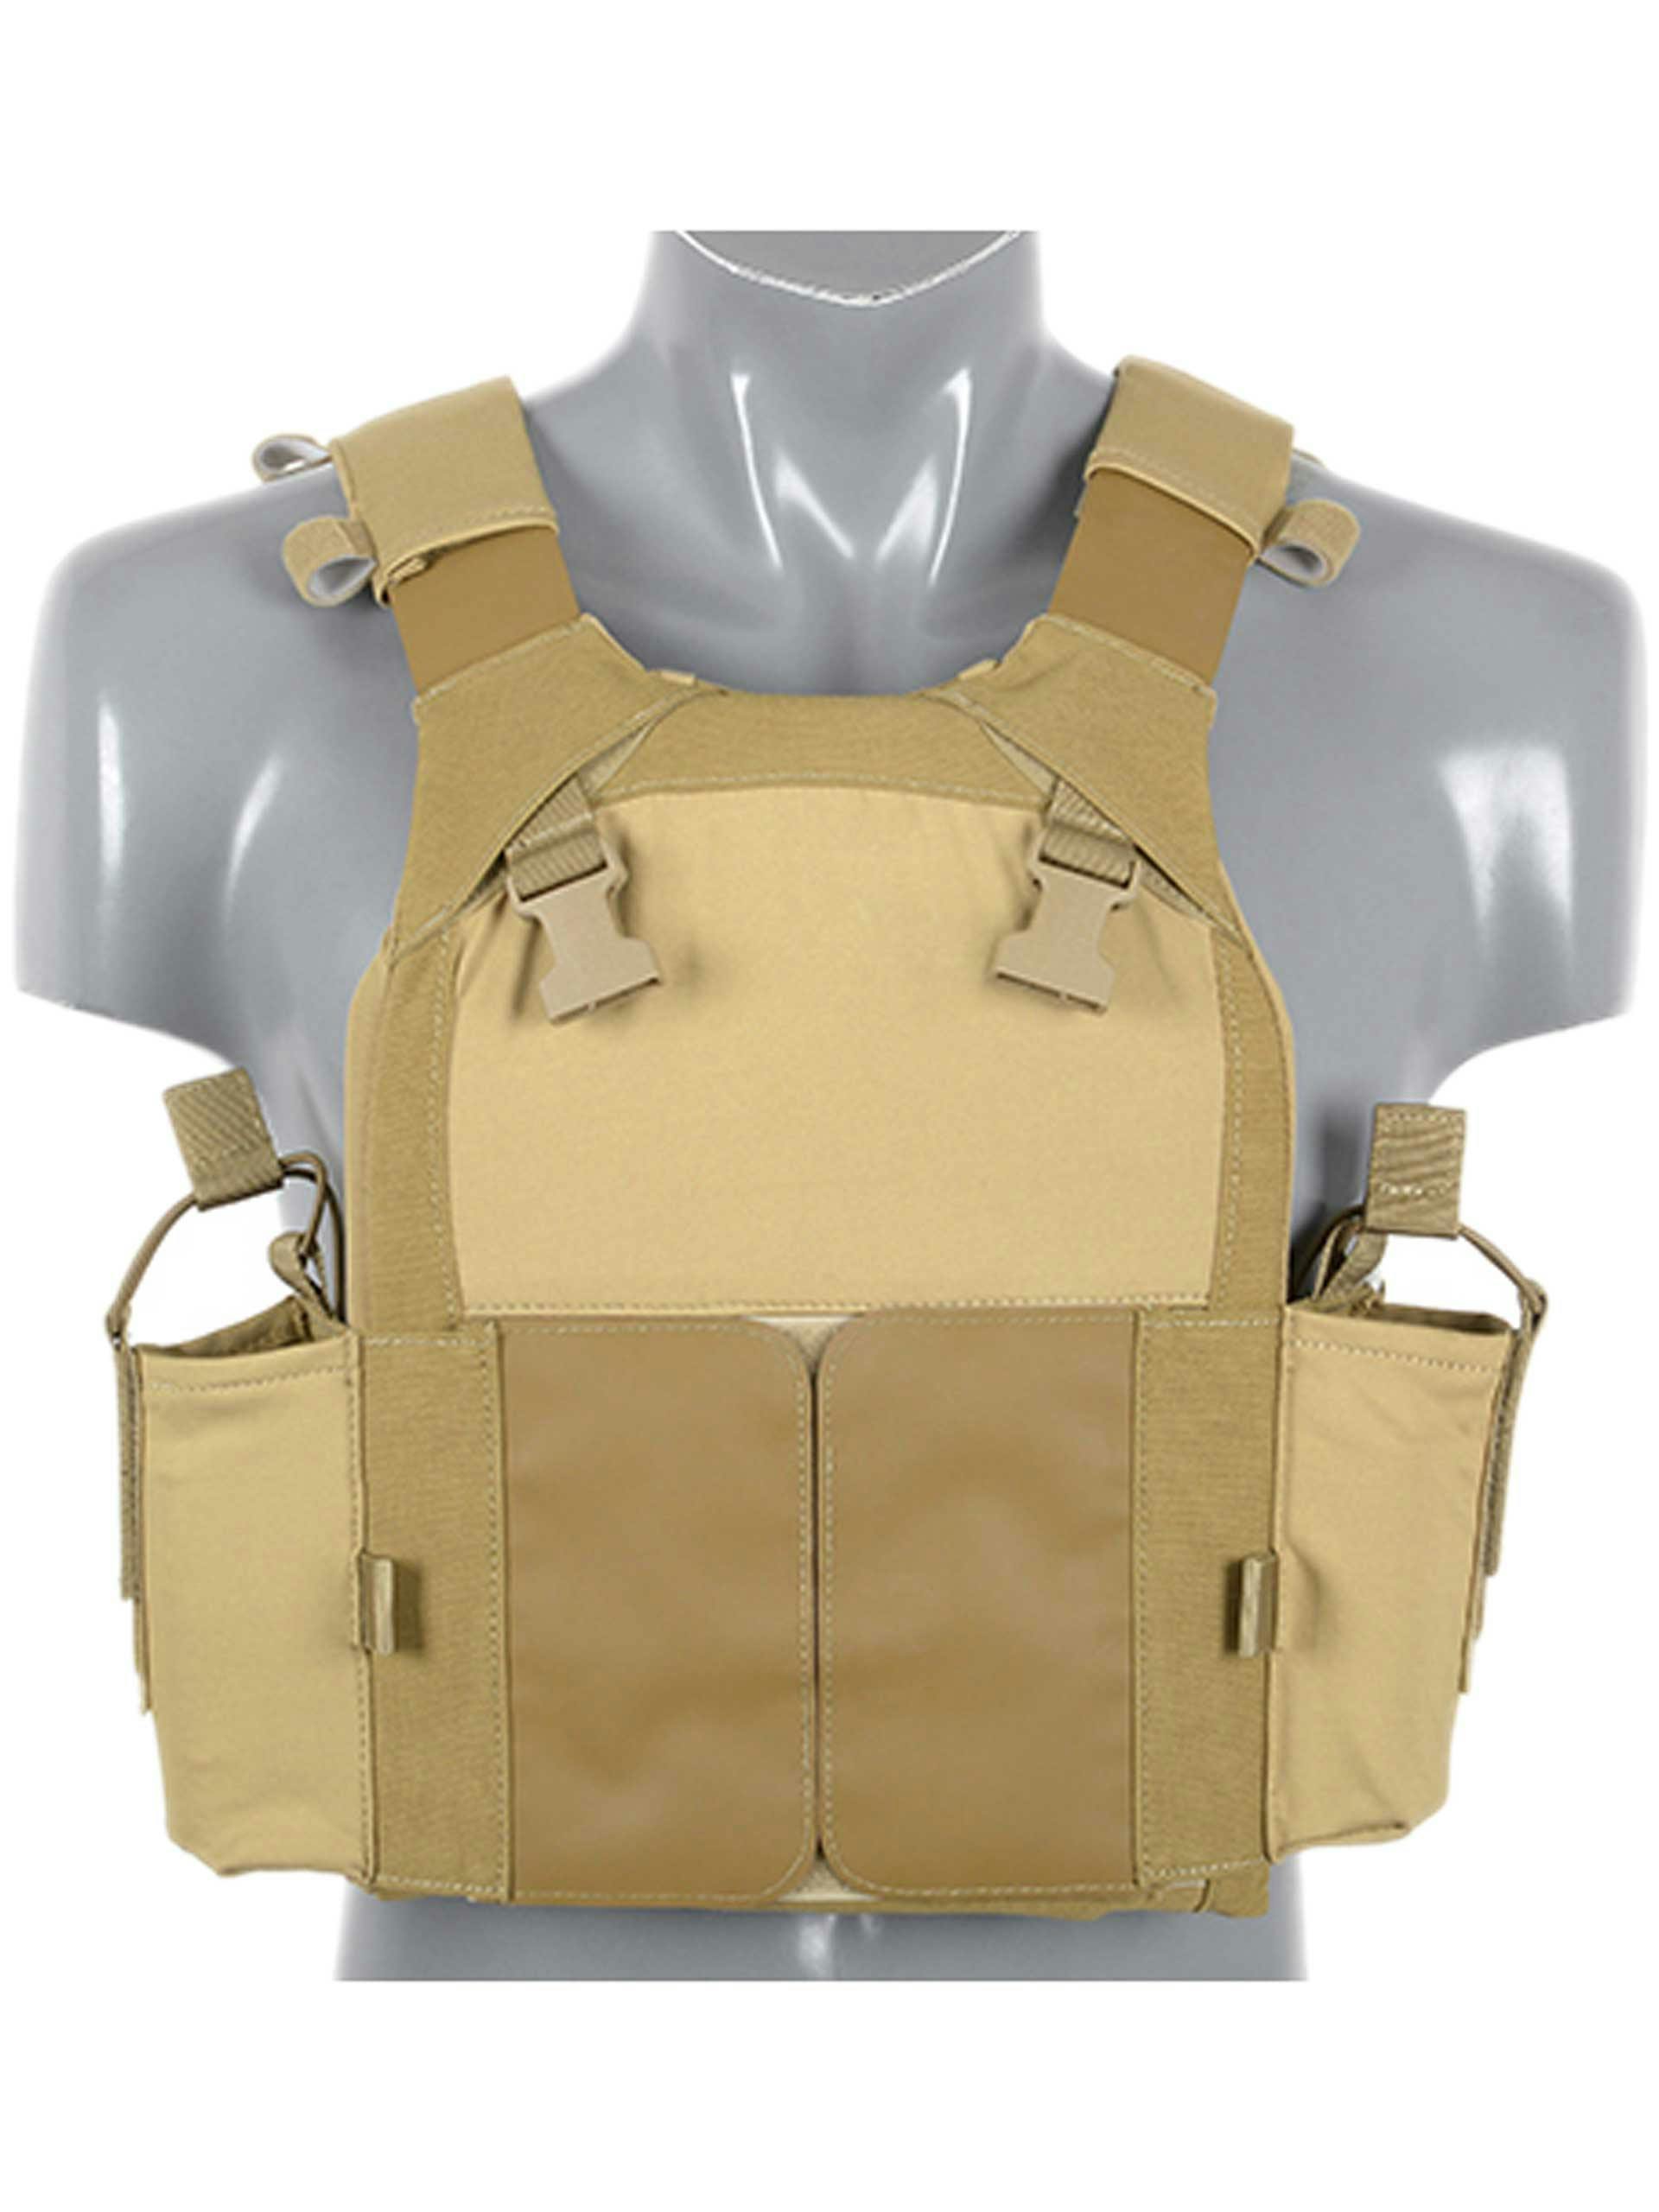 EMERSON Tactical Combat Vest Armor LV-MBAV Plate Carrier Body Army W/ Mag  Pouch